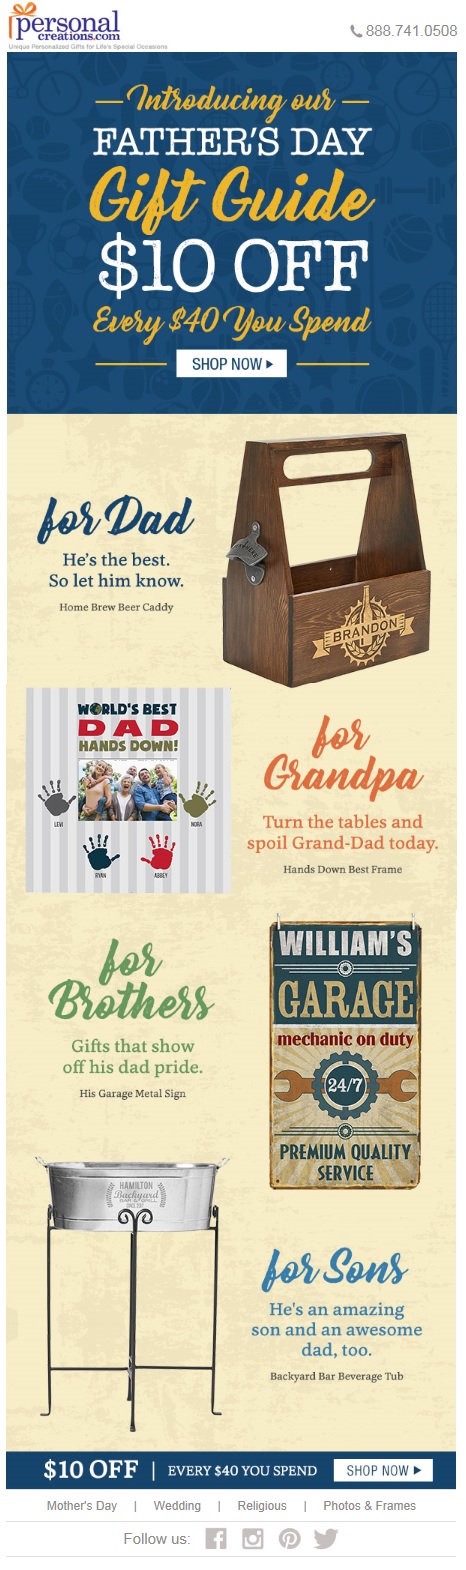 This email from PersonalCreations.com contains a $10 off offer. The merchandise focuses on Father’s Day, with different products for different fathers.